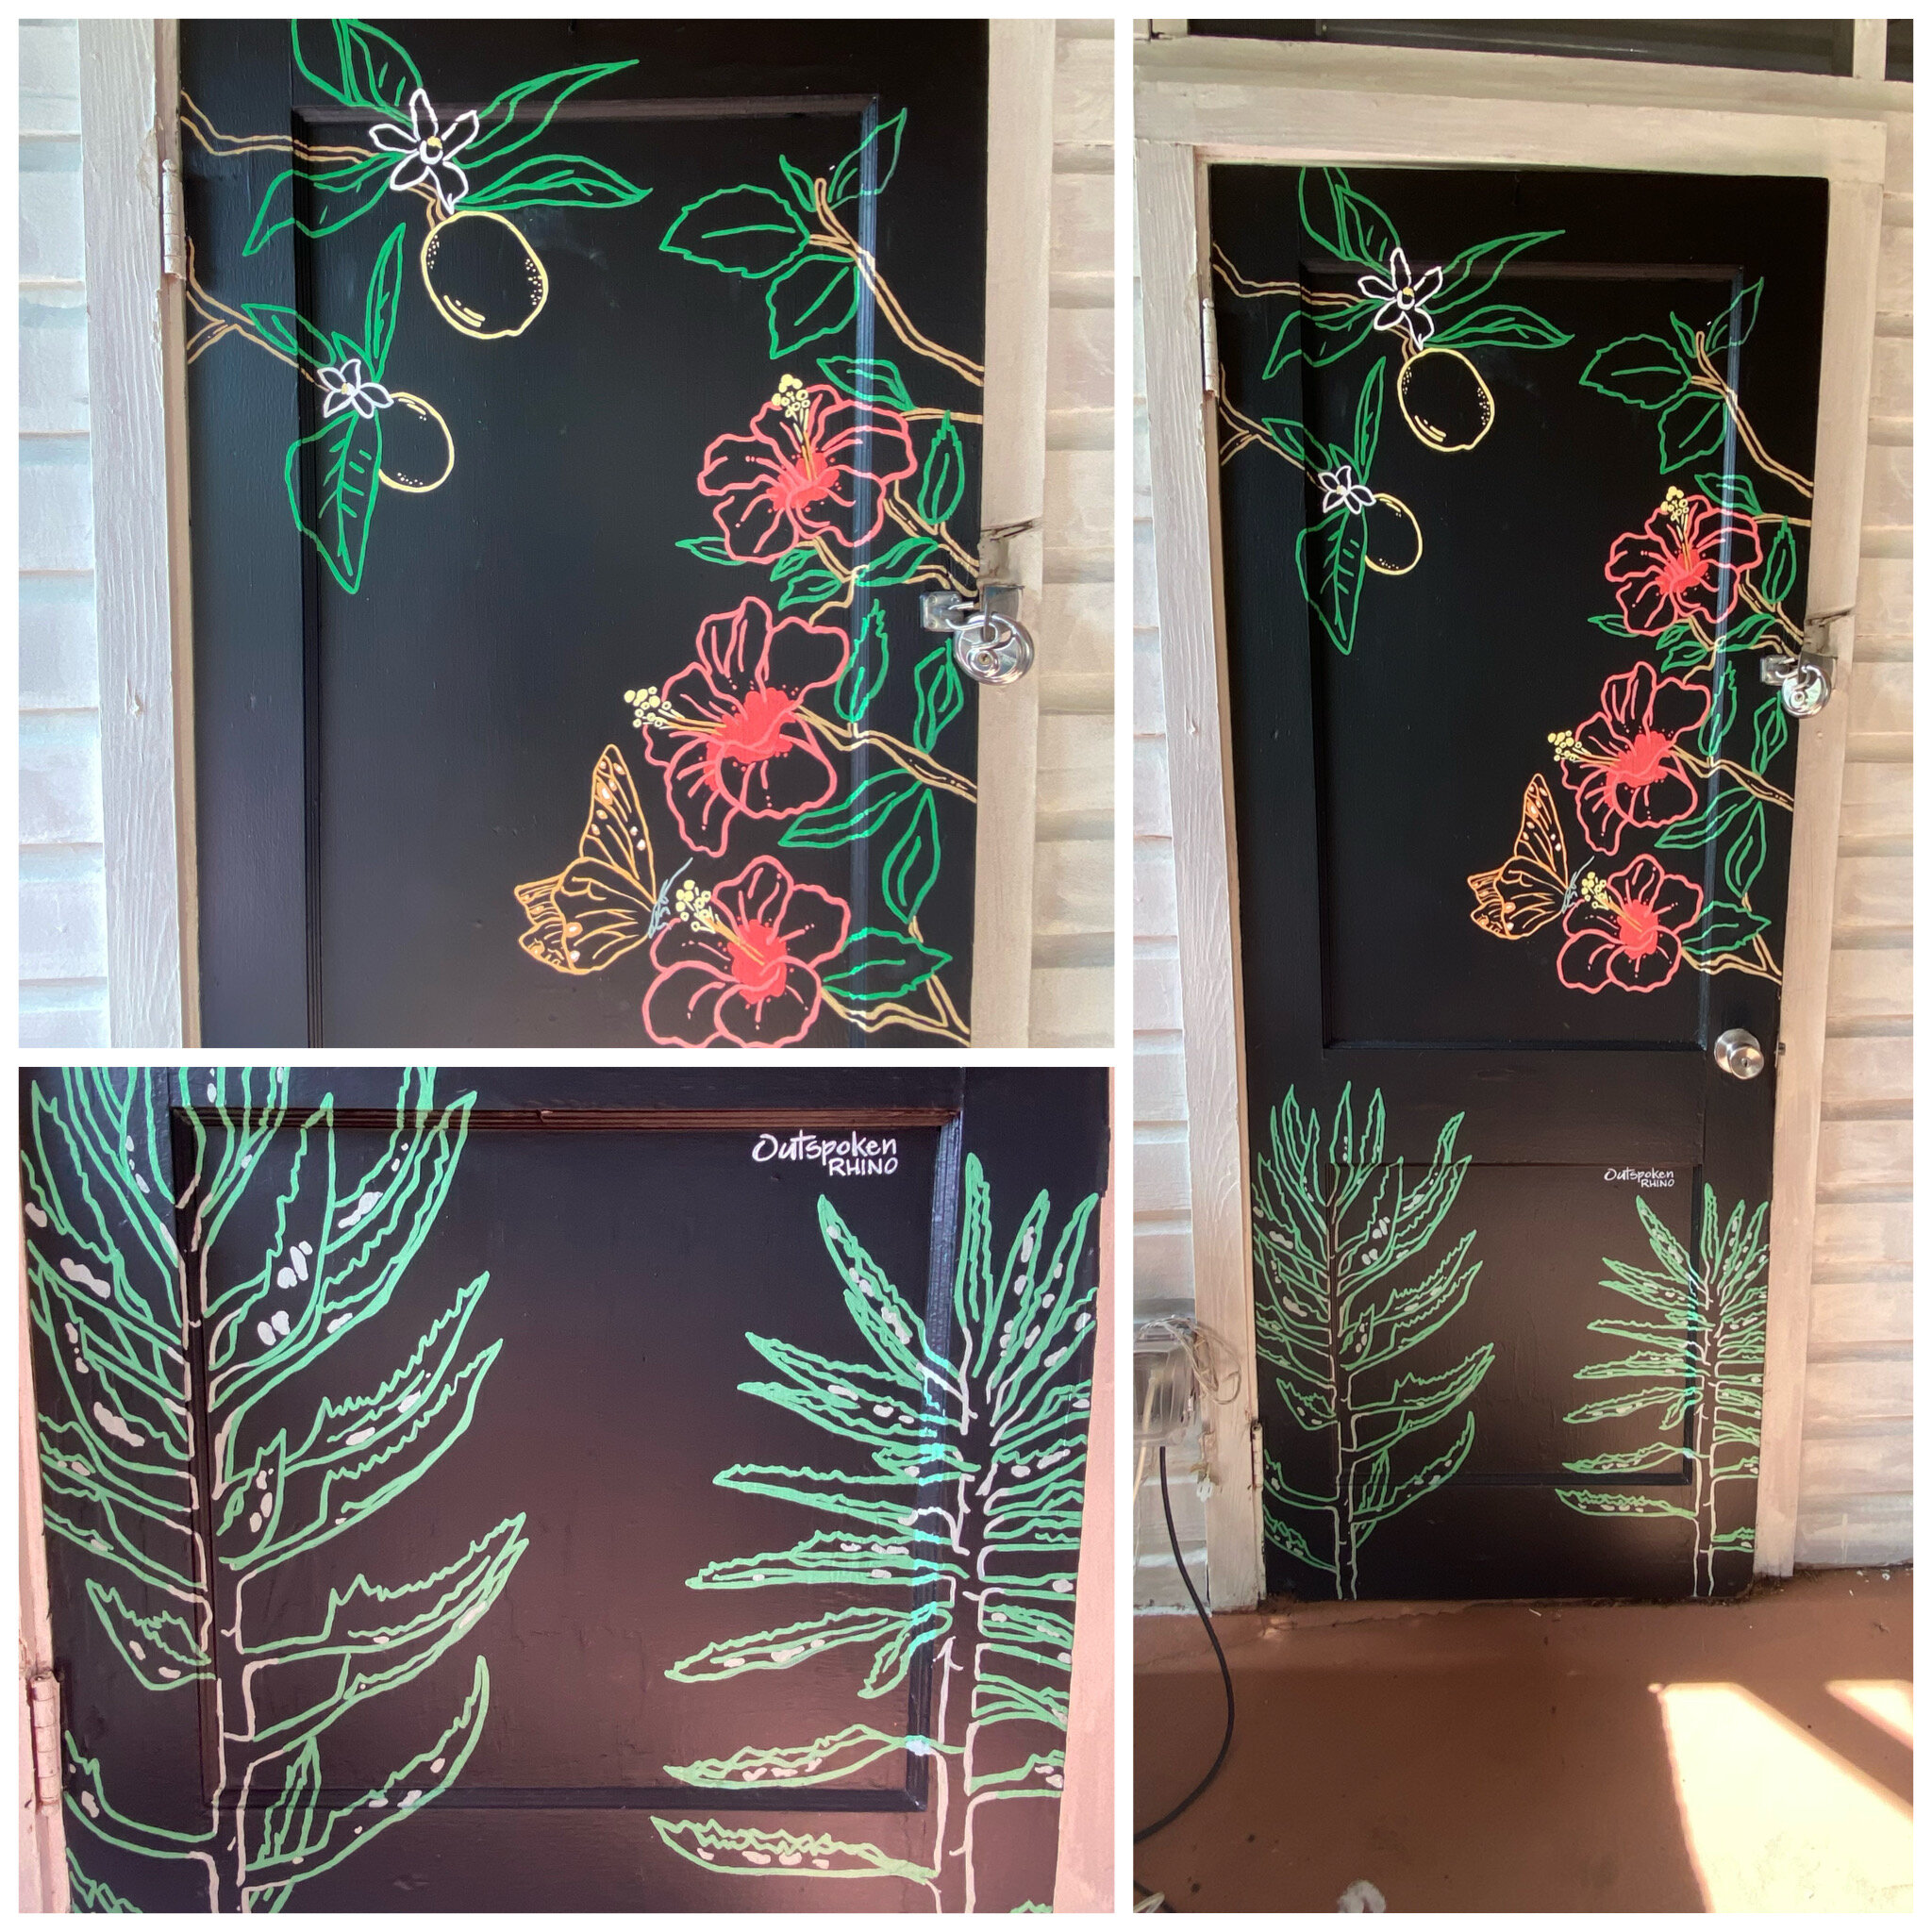 Lemon tree, butterfly, hibiscus, mother of thousands chalkboard mural 